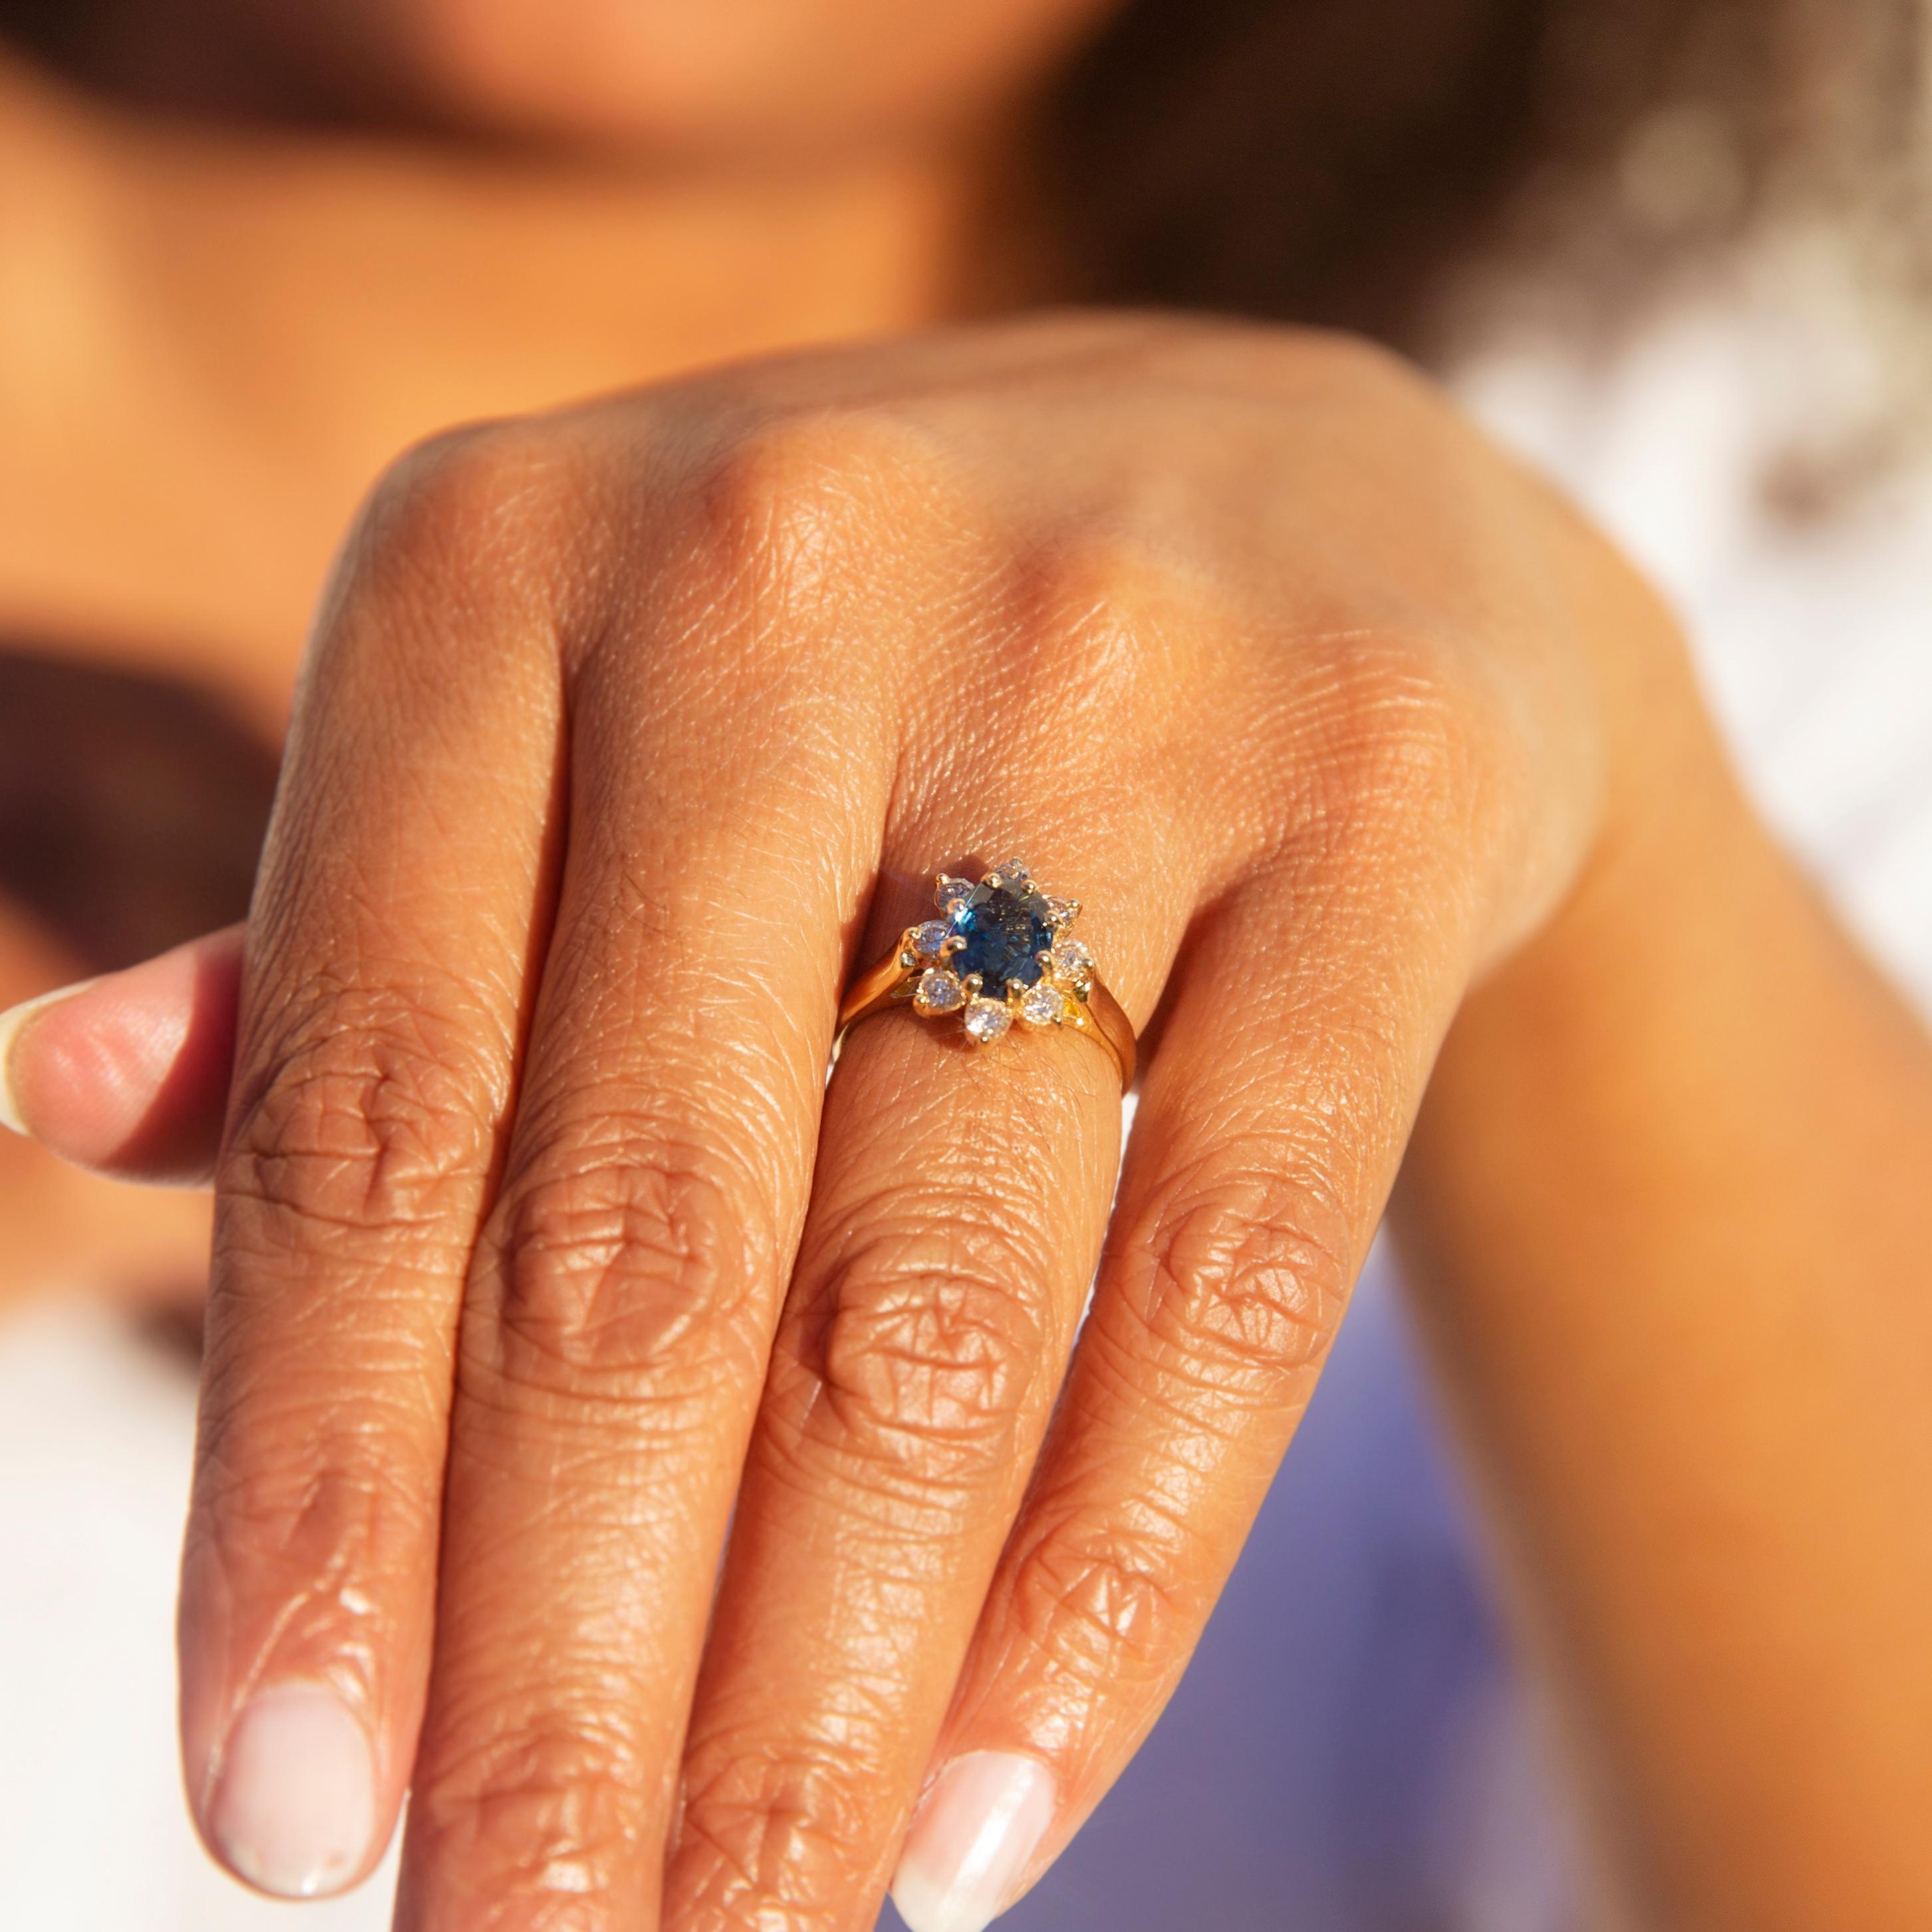 Lovingly crafted in 18 carat gold, The Jude Ring is a stunning piece. Set with an exquisite 1.48ct sapphire framed in a shimmering halo of diamonds, she is both a classic and desirable.  

The Jude Ring Gem Details
The faceted oval natural deep